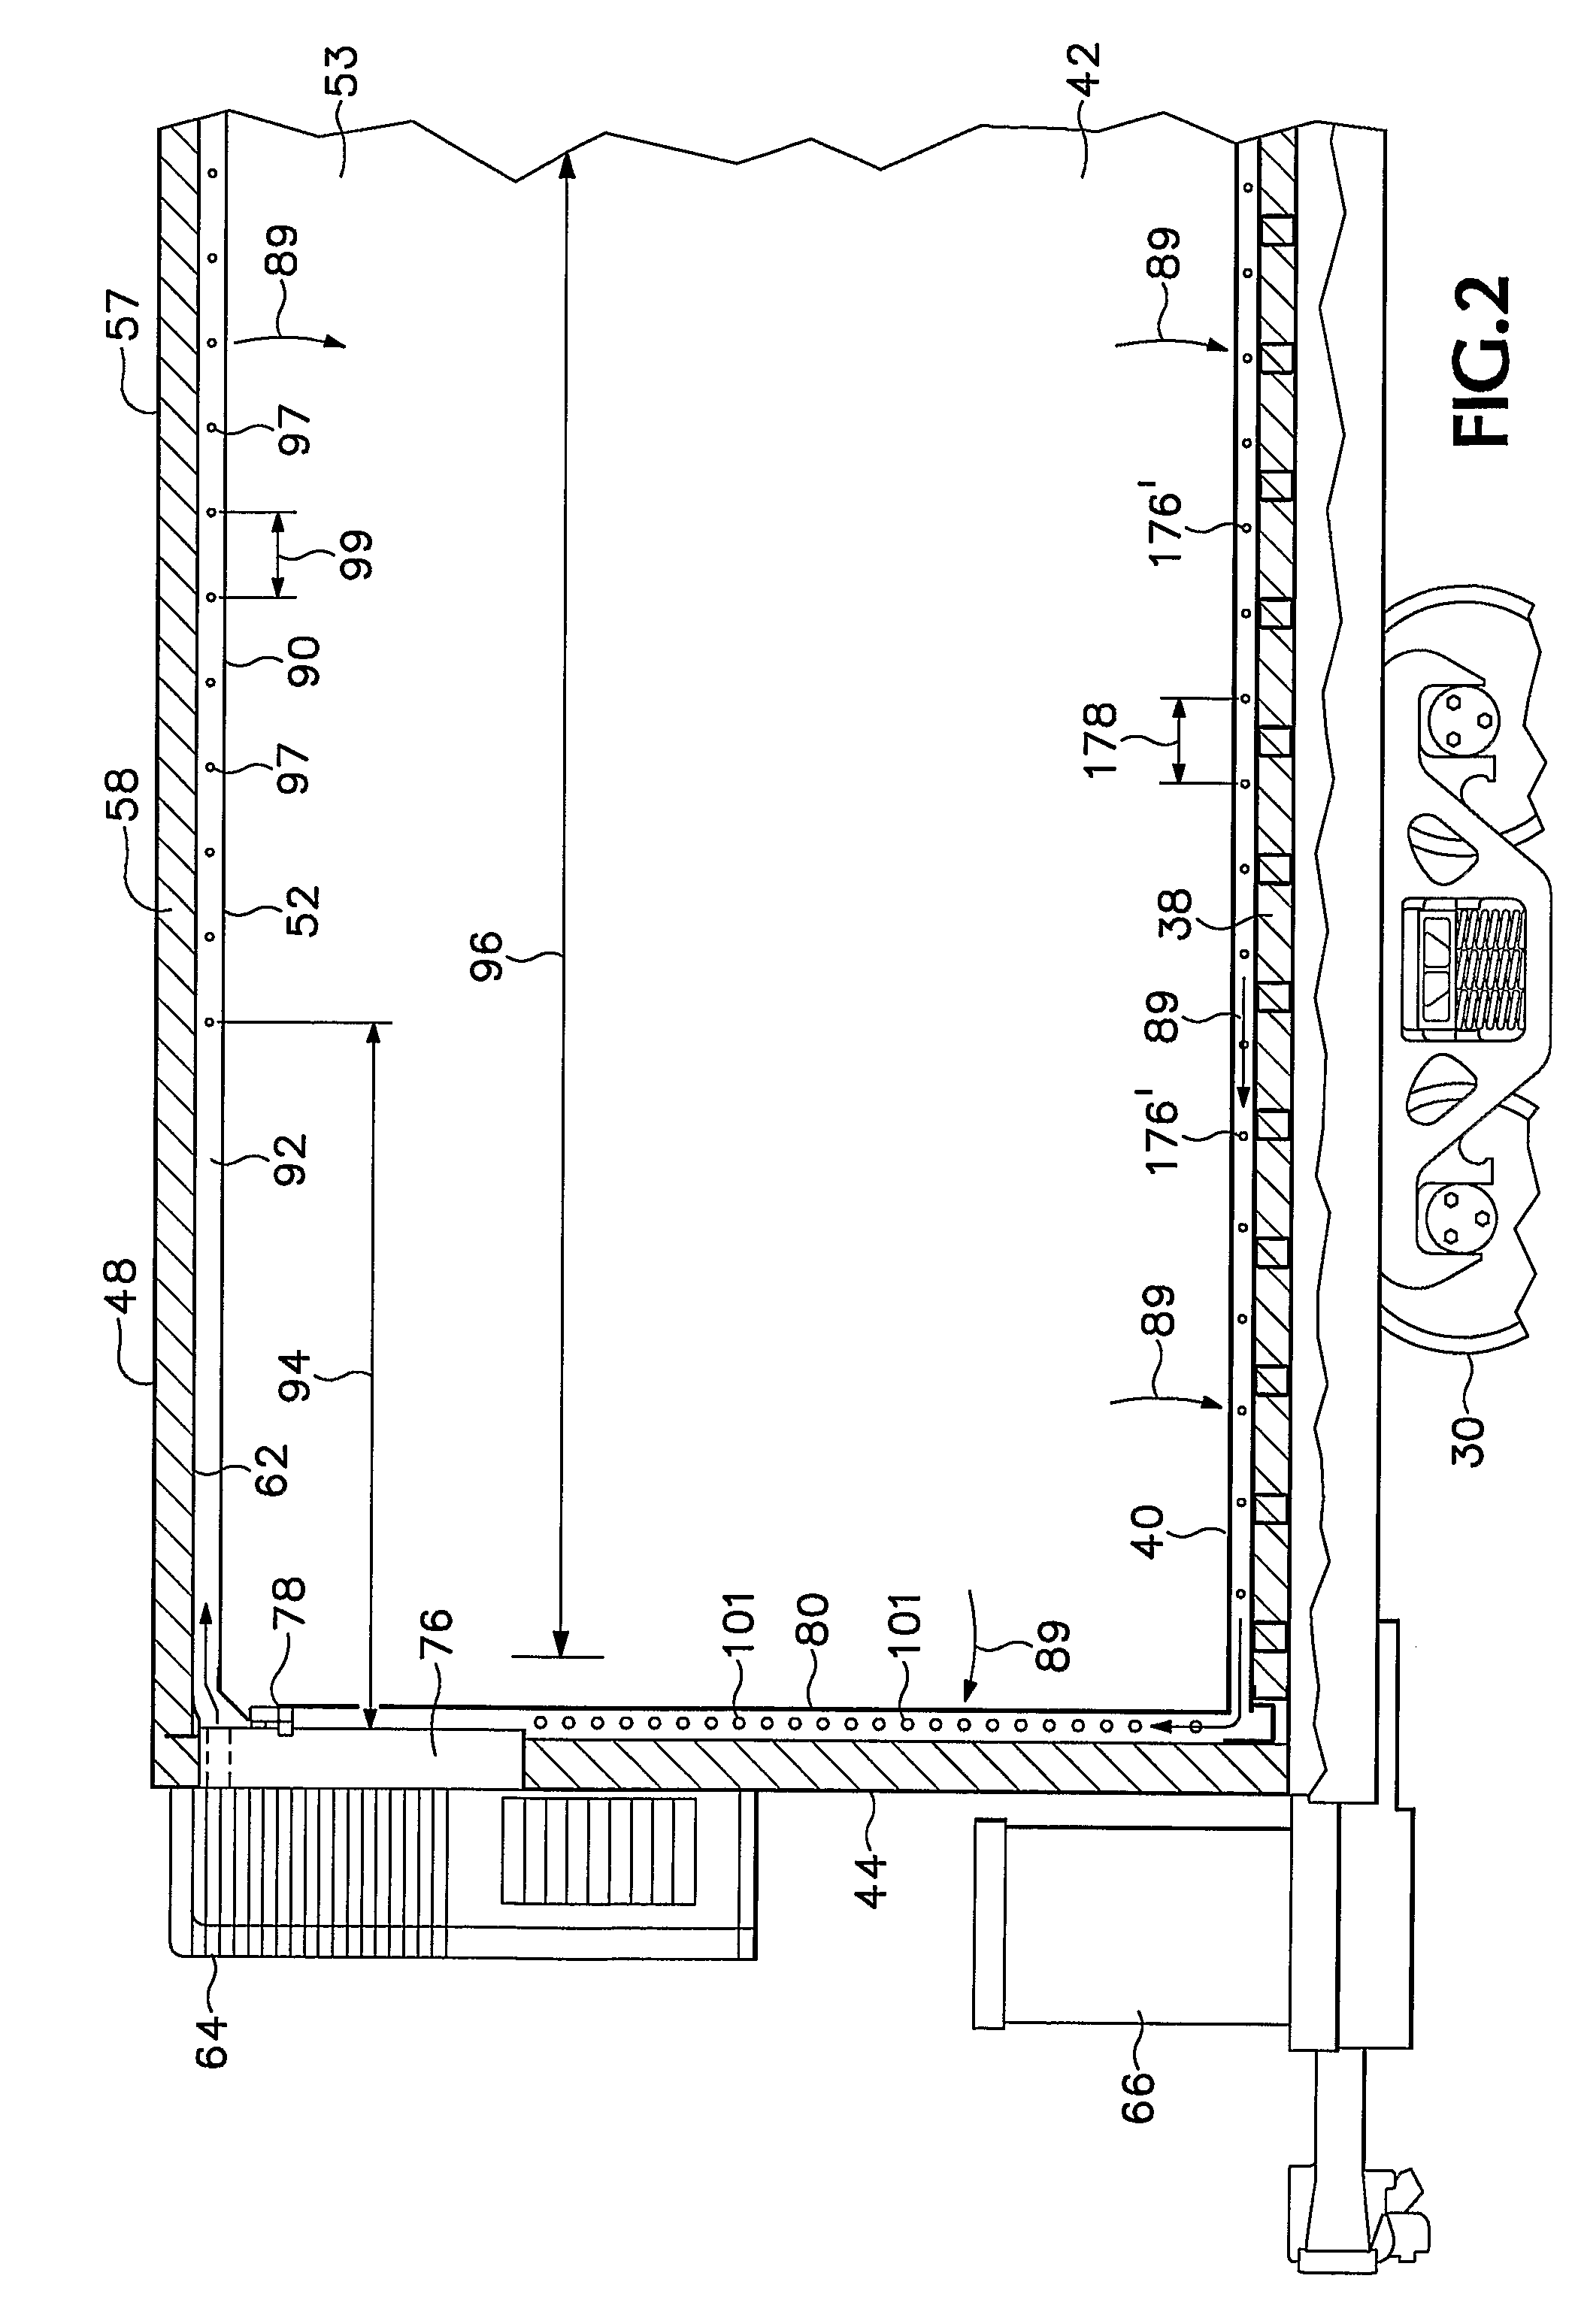 Air flow direction in a temperature controlled railroad freight car